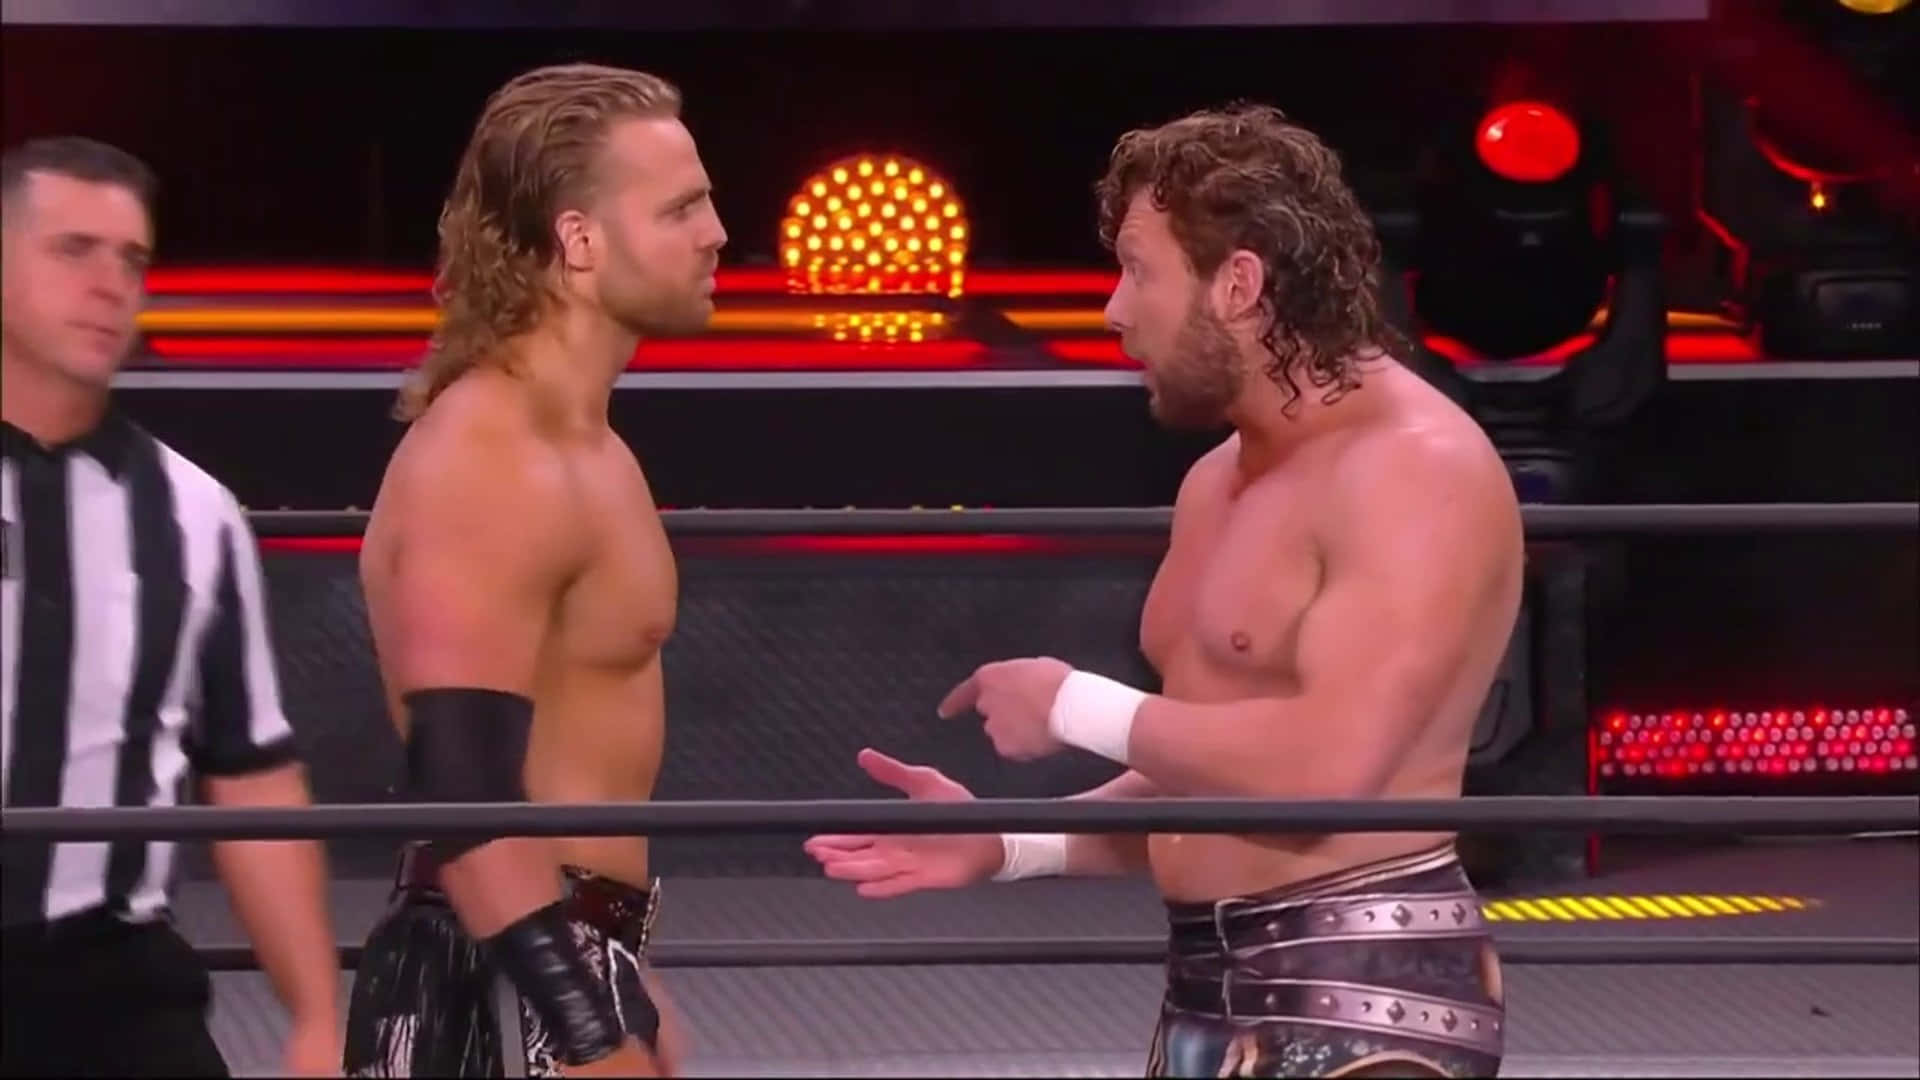 Adam Page And Kenny Omega Inside AEW Ring Wallpaper